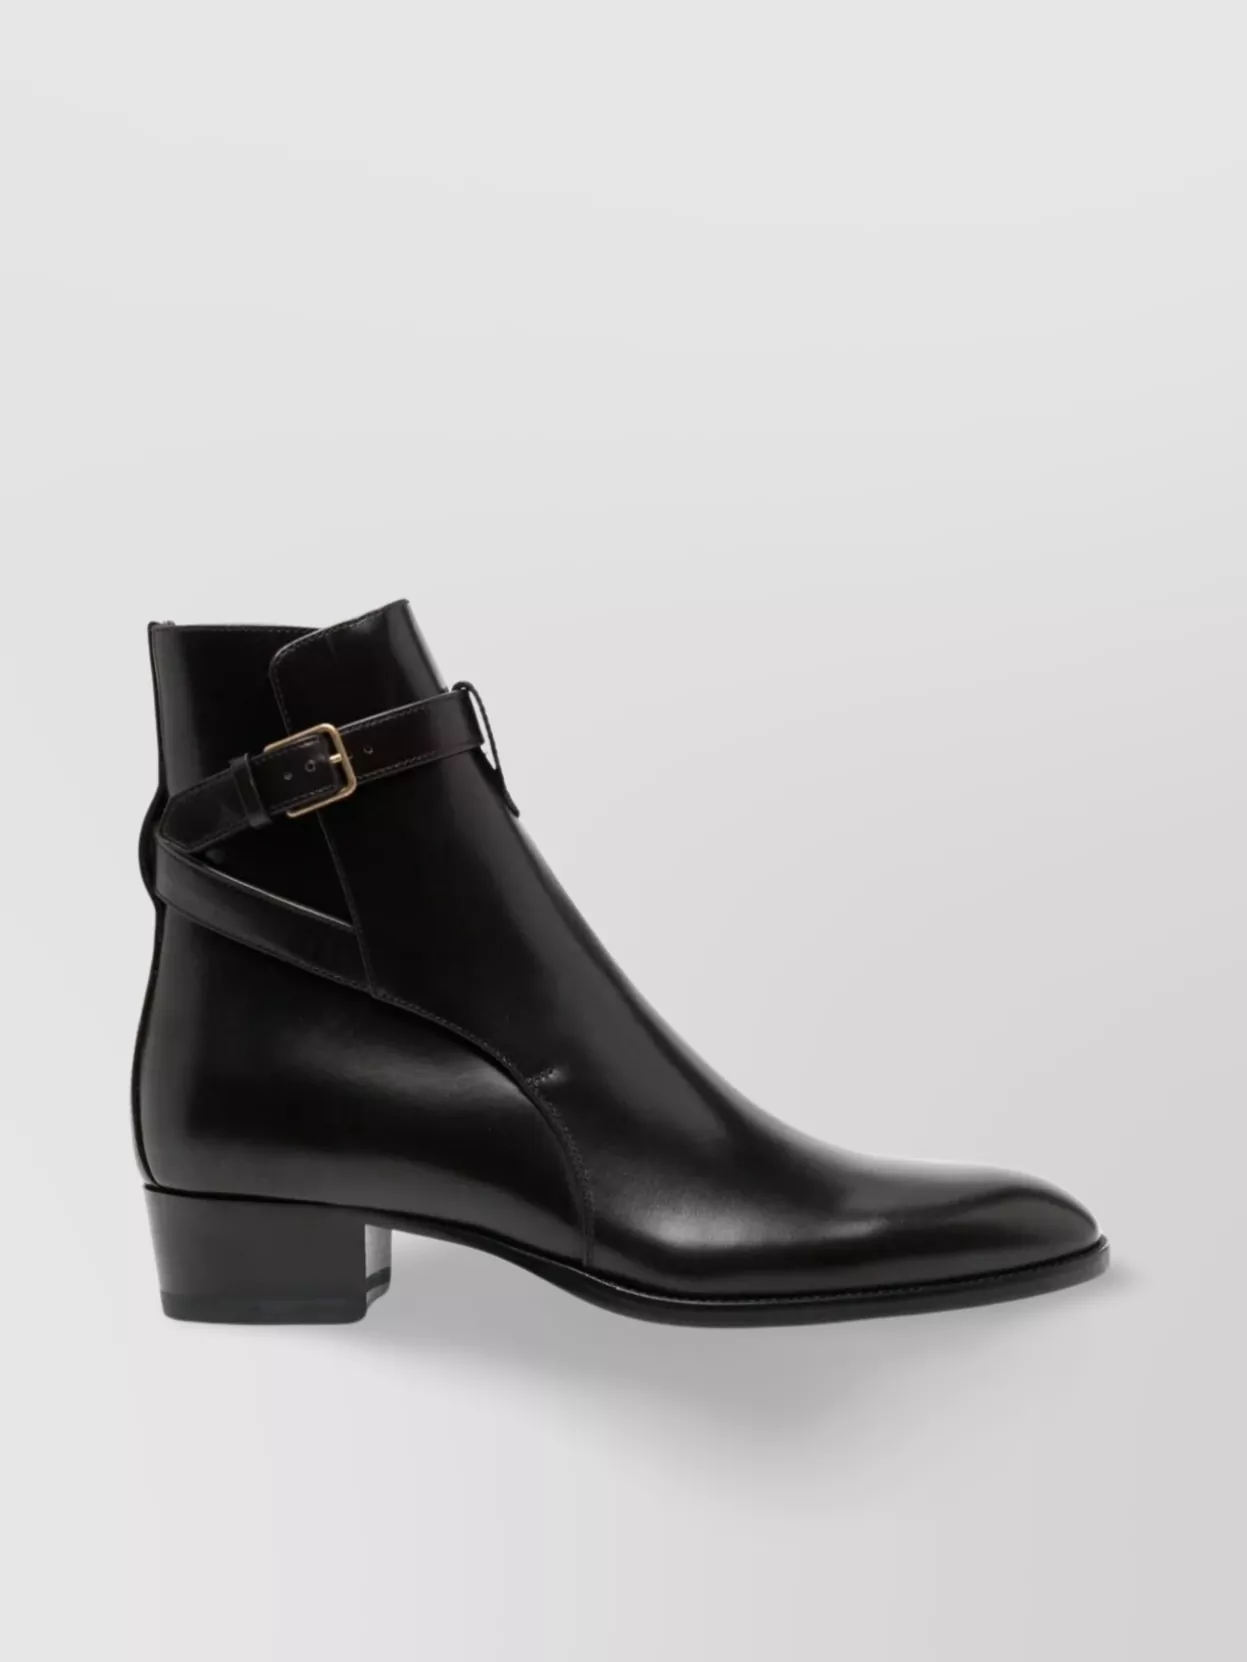 Shop Saint Laurent Jodphur Boots With Stacked Heel And Buckle Detail